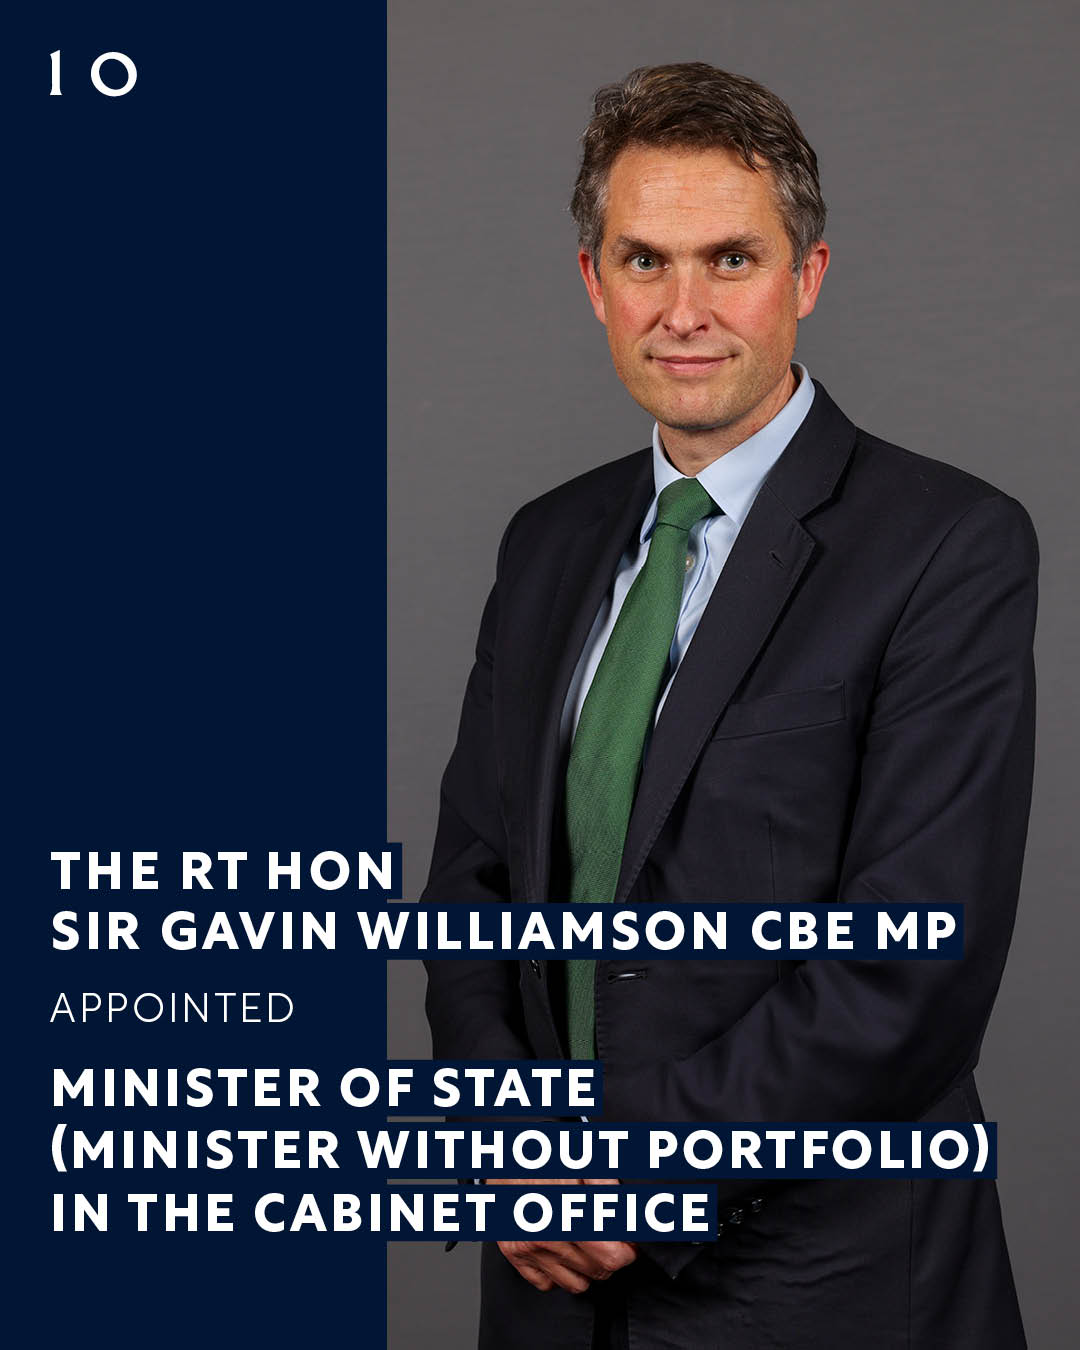 The Rt Hon Sir Gavin Williamson CBE MP appointed Minister of State Minister without portfolio in the Cabinet Office